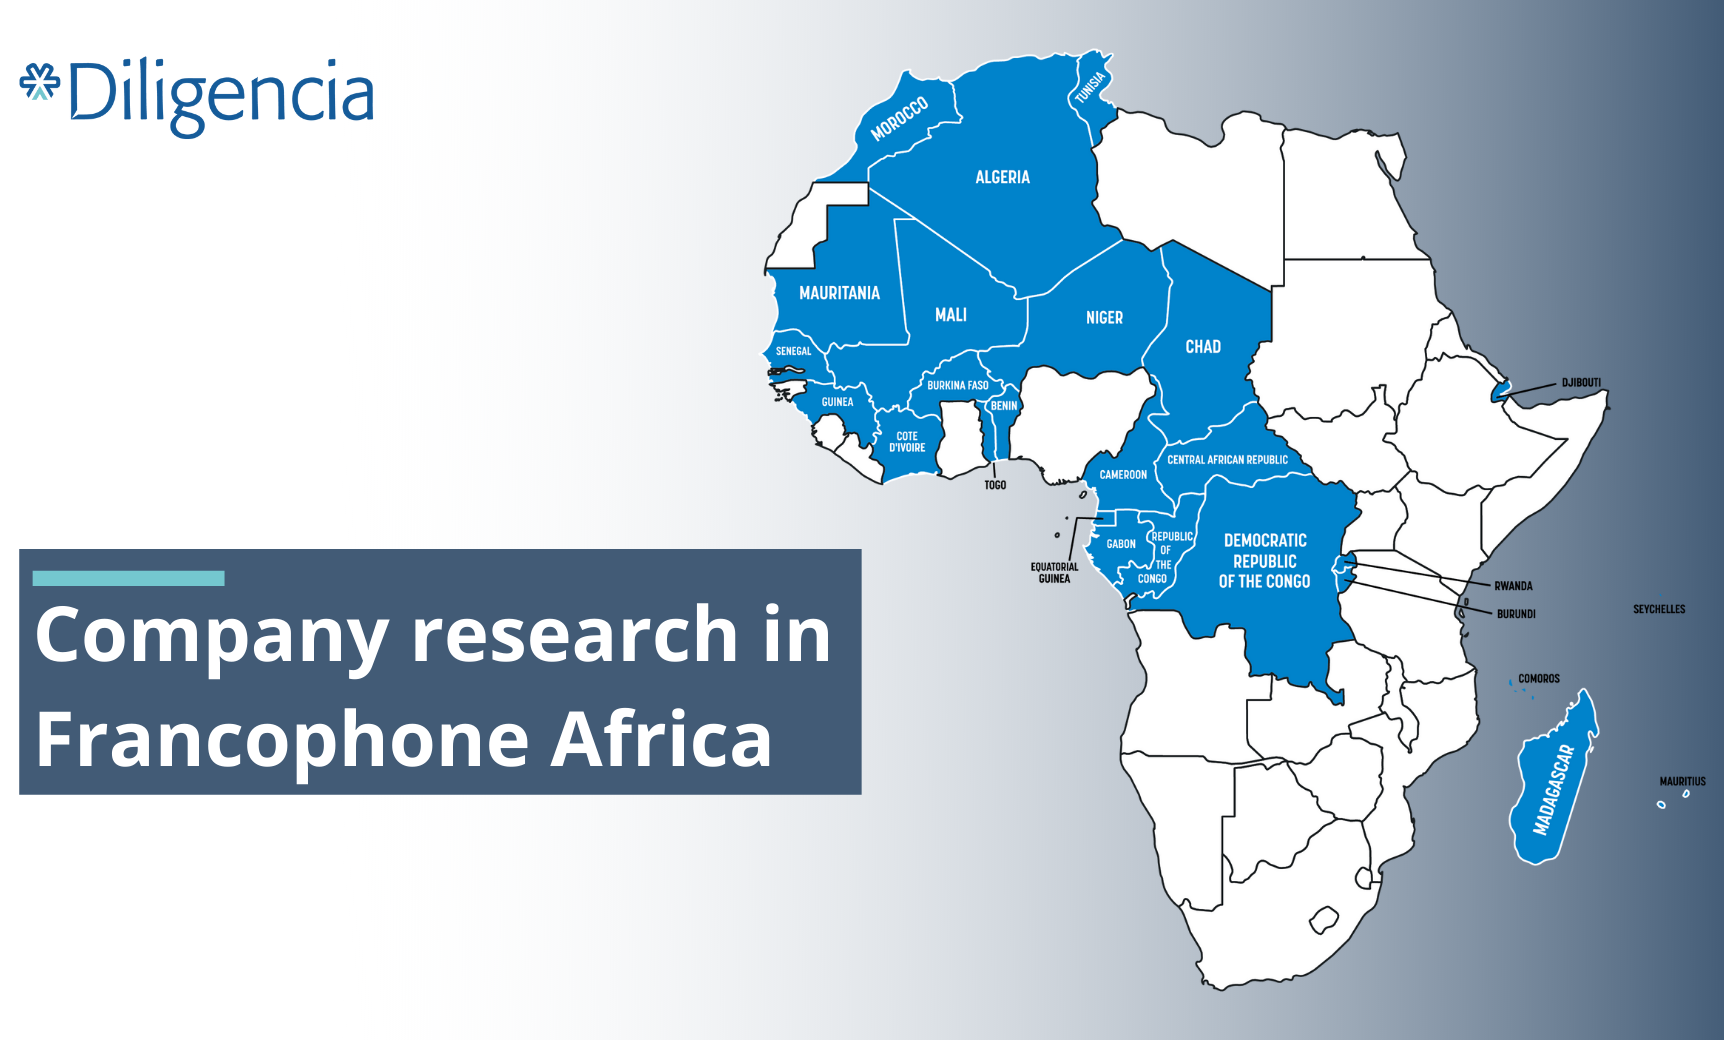 Diligencia LP Company research in Francophone Africa 